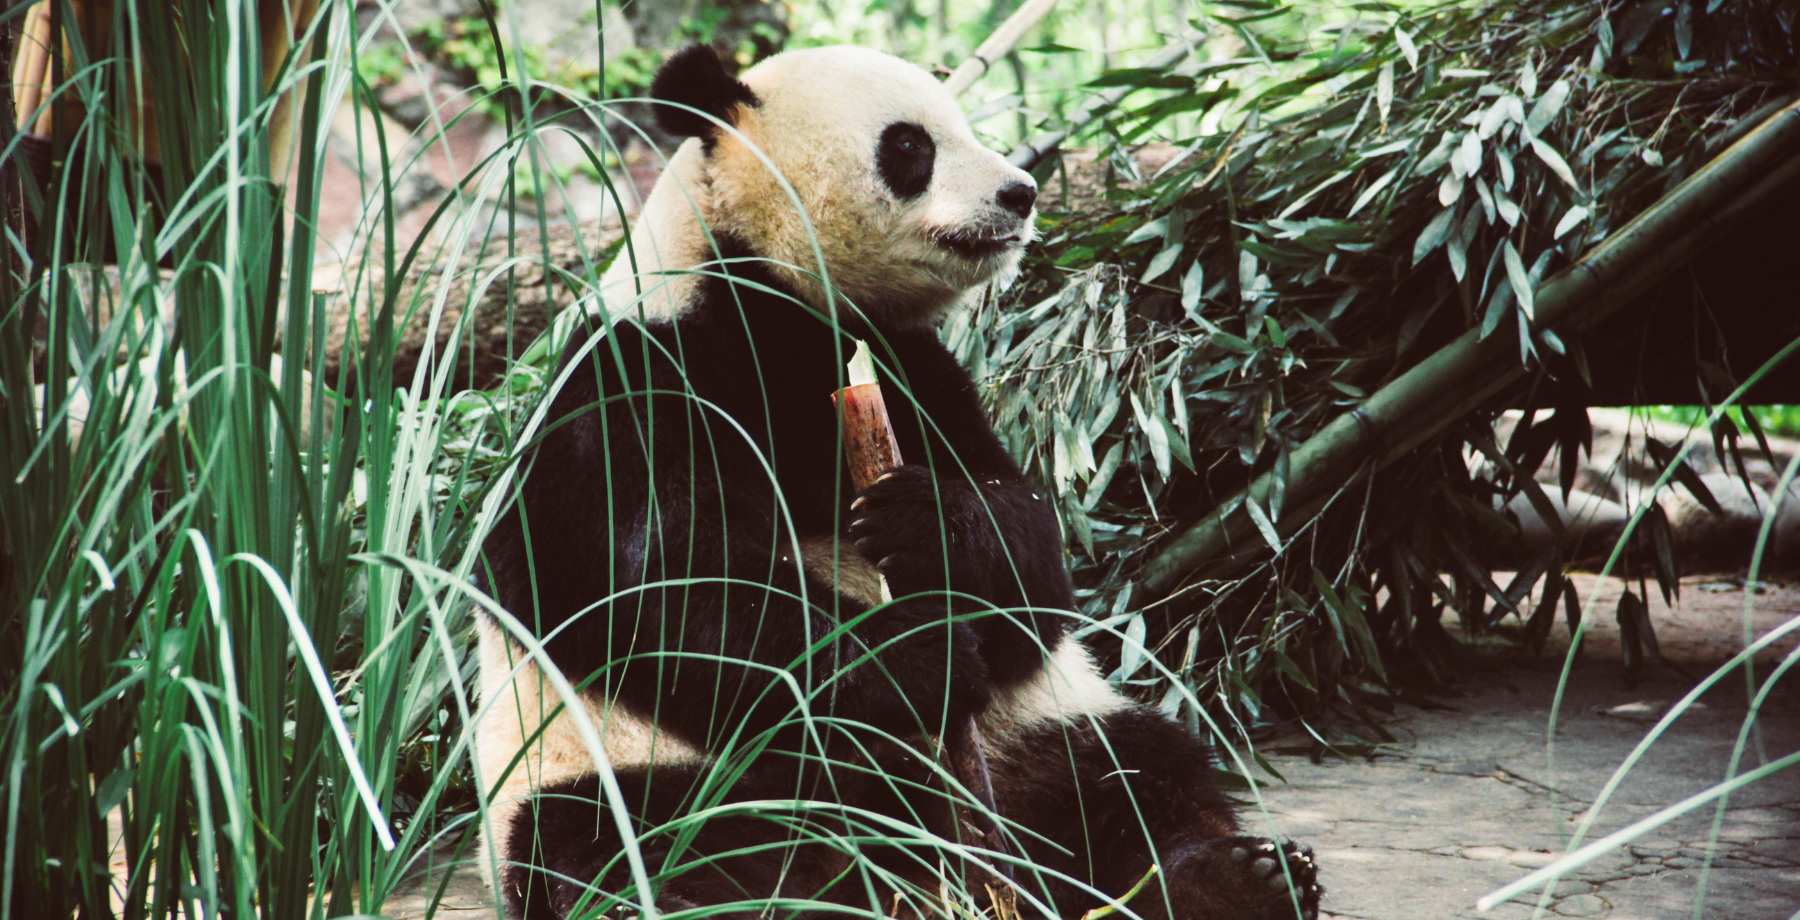 Panda sitting on the ground surrounded by foliage